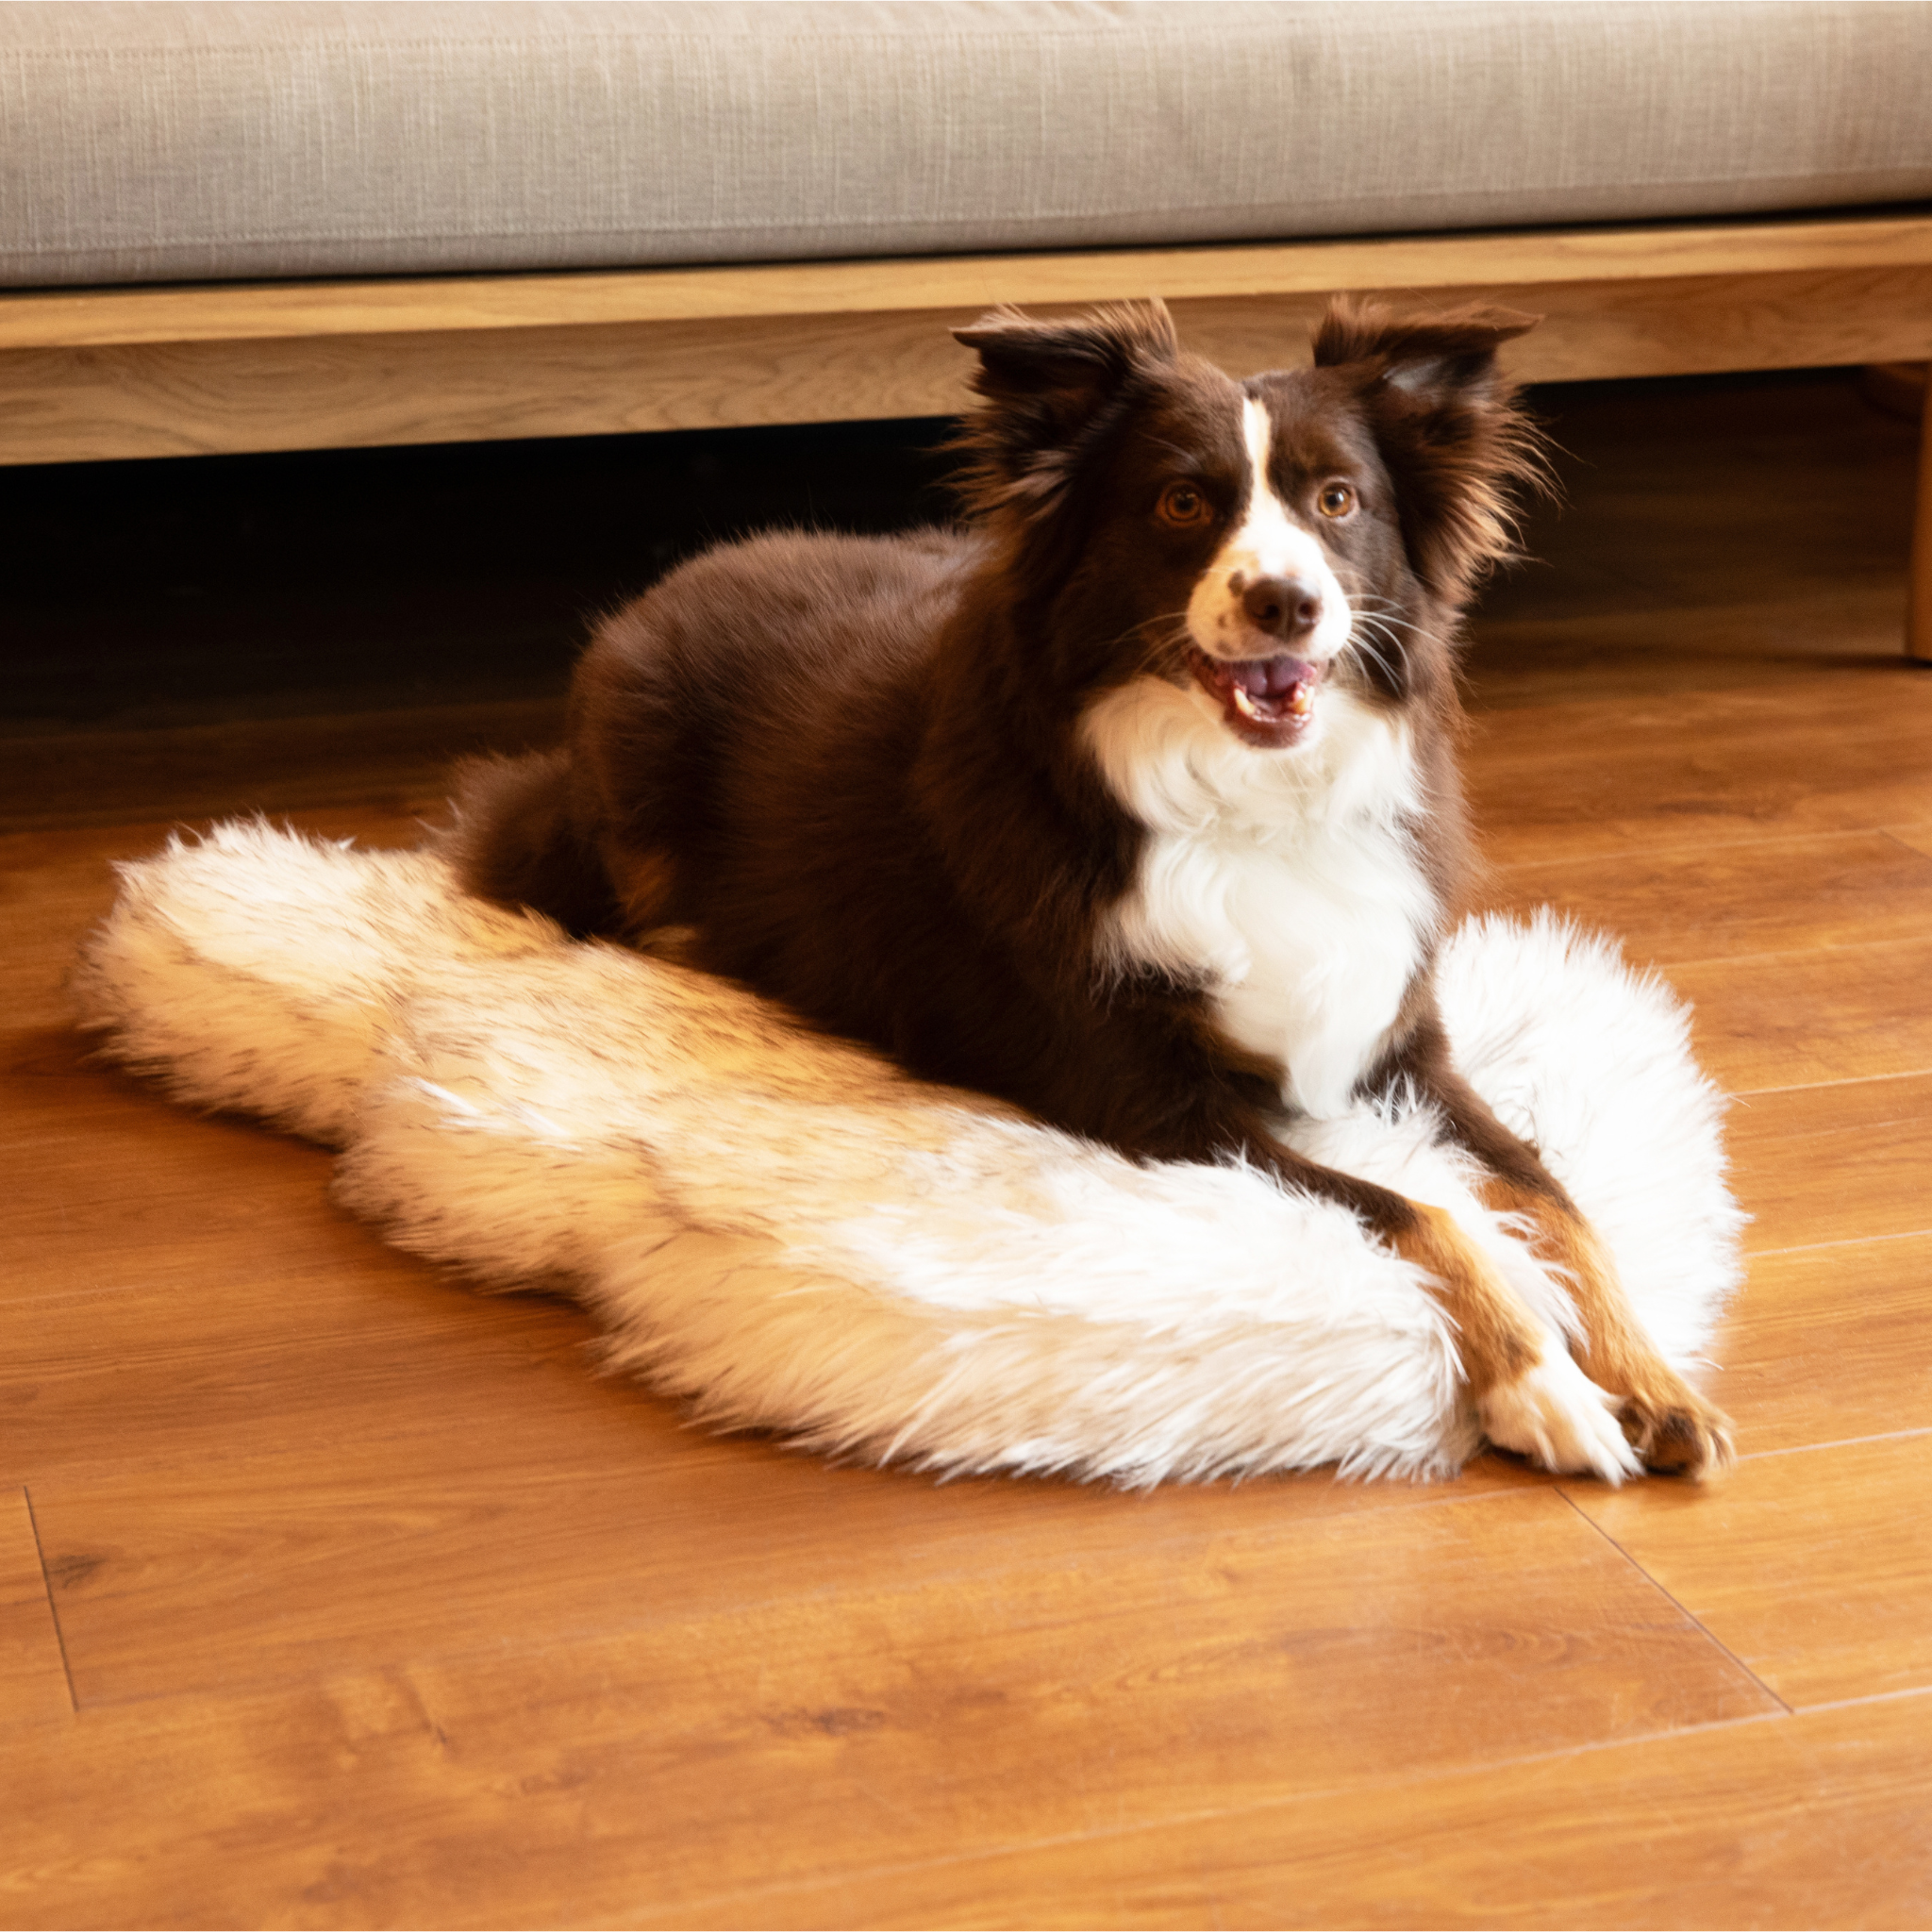 PupRug™ Faux Fur Orthopedic Dog Bed - Curve White with Brown Accents